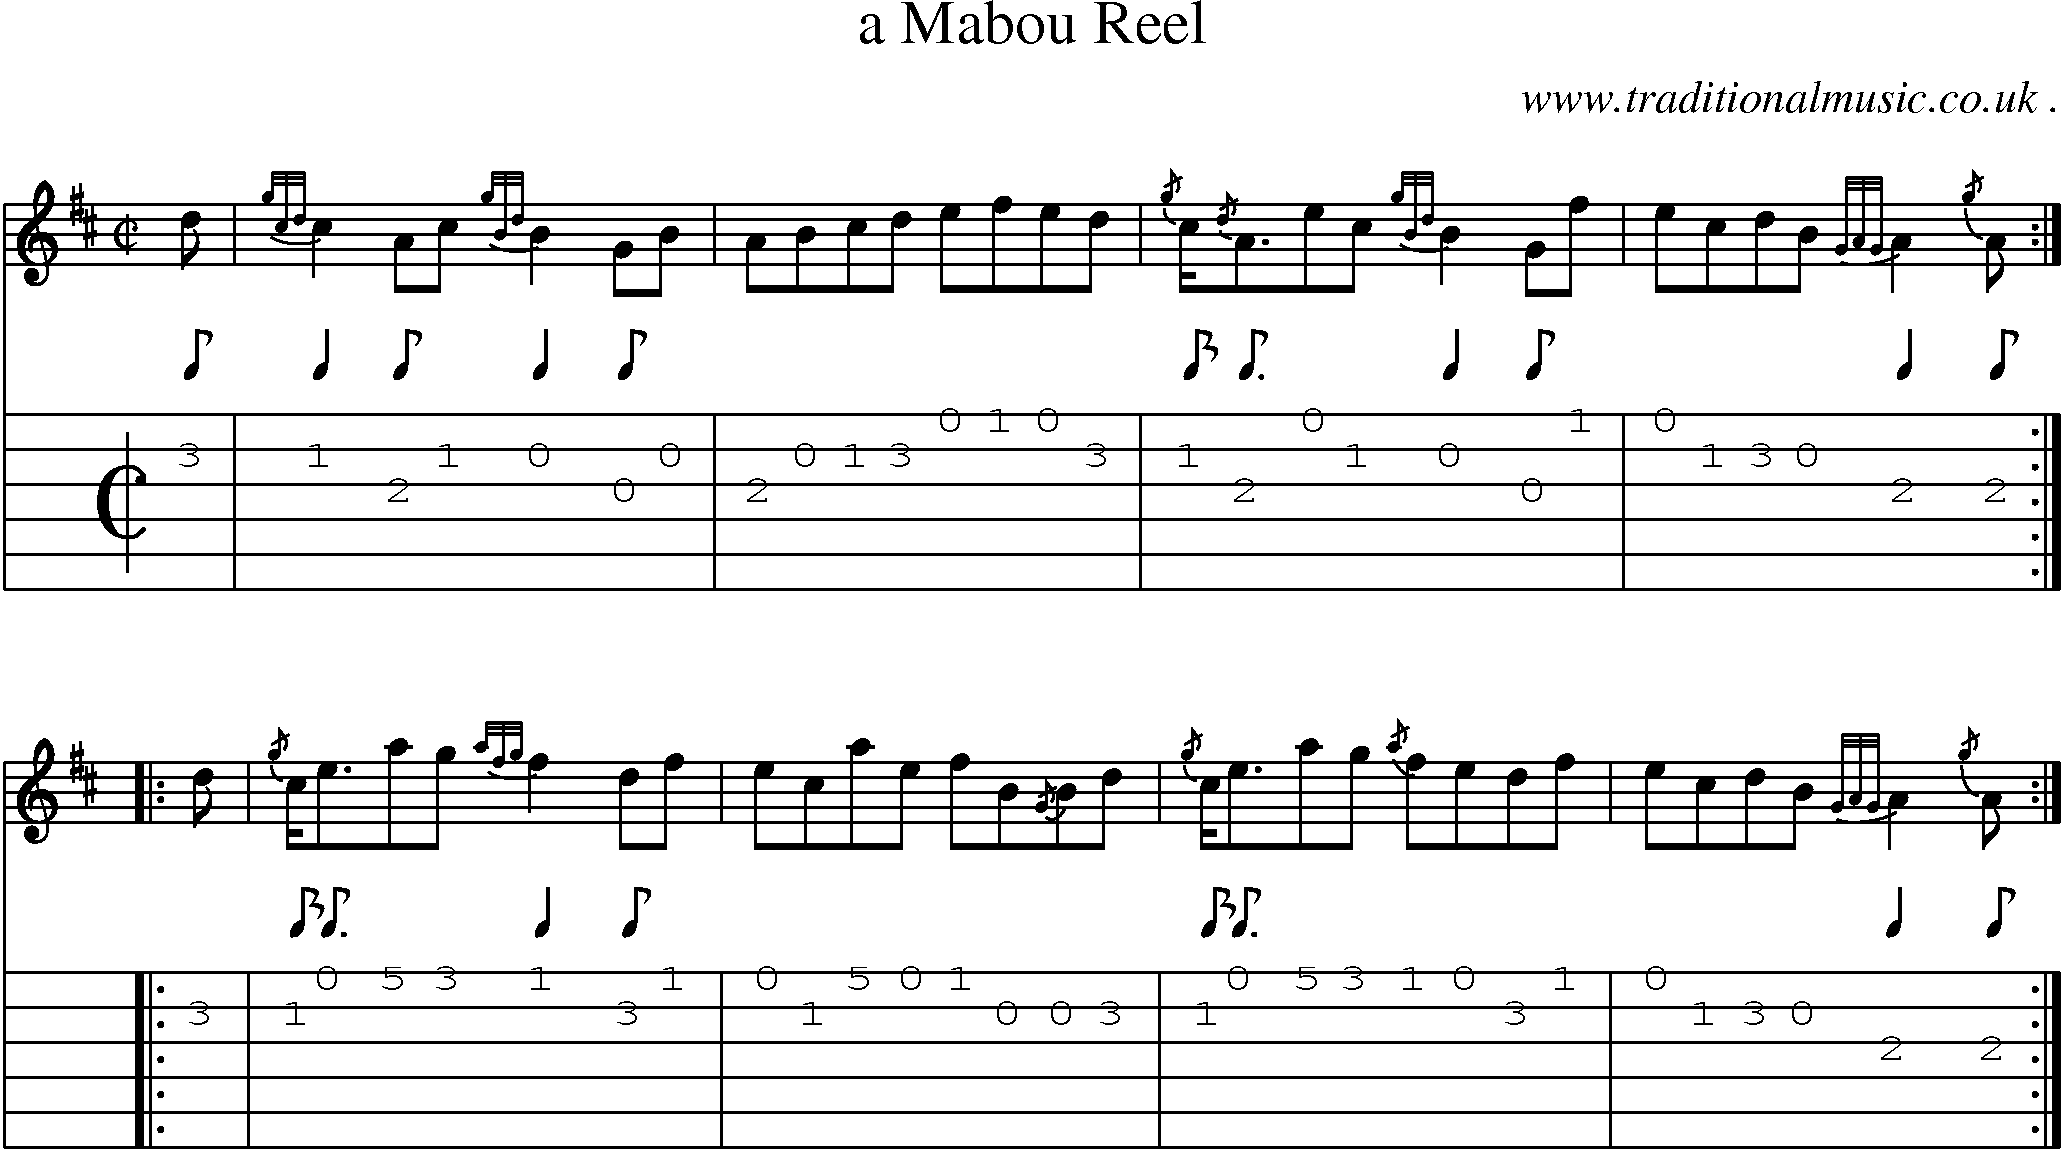 Sheet-music  score, Chords and Guitar Tabs for A Mabou Reel